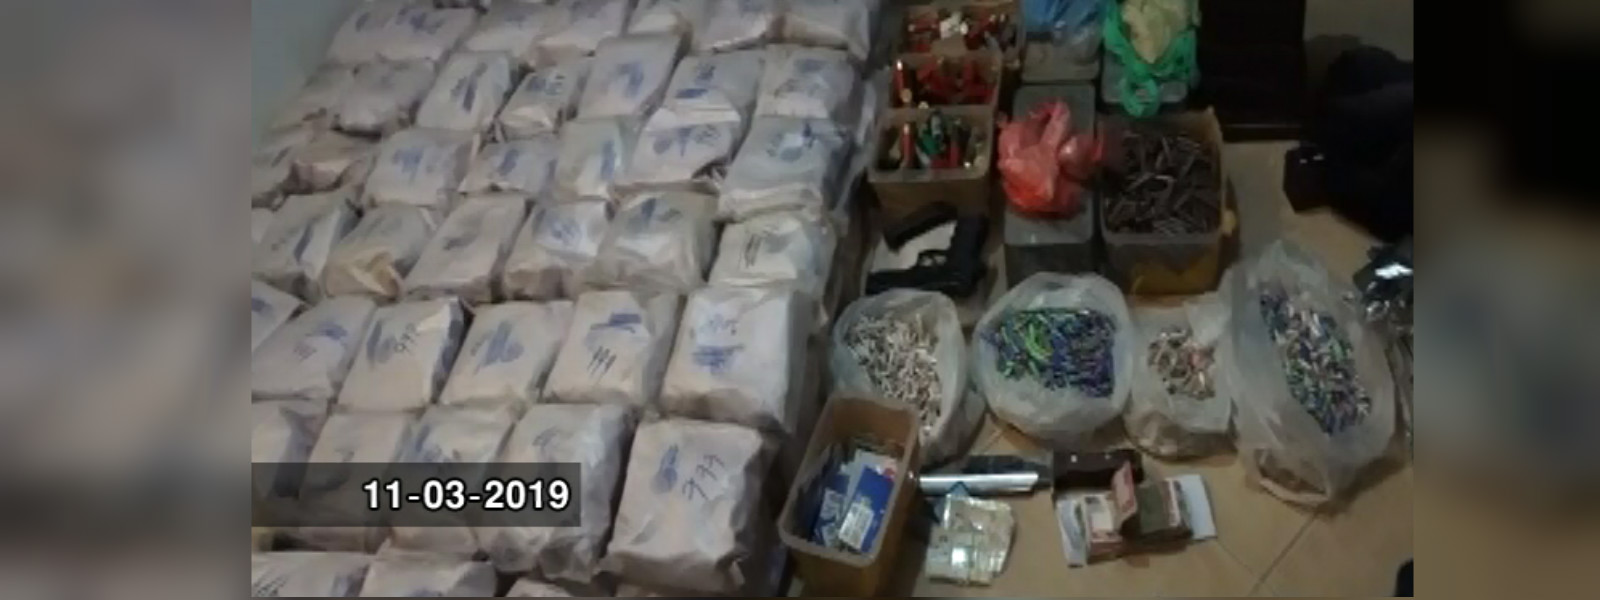 Moratuwa drug bust connected to "Madush"?